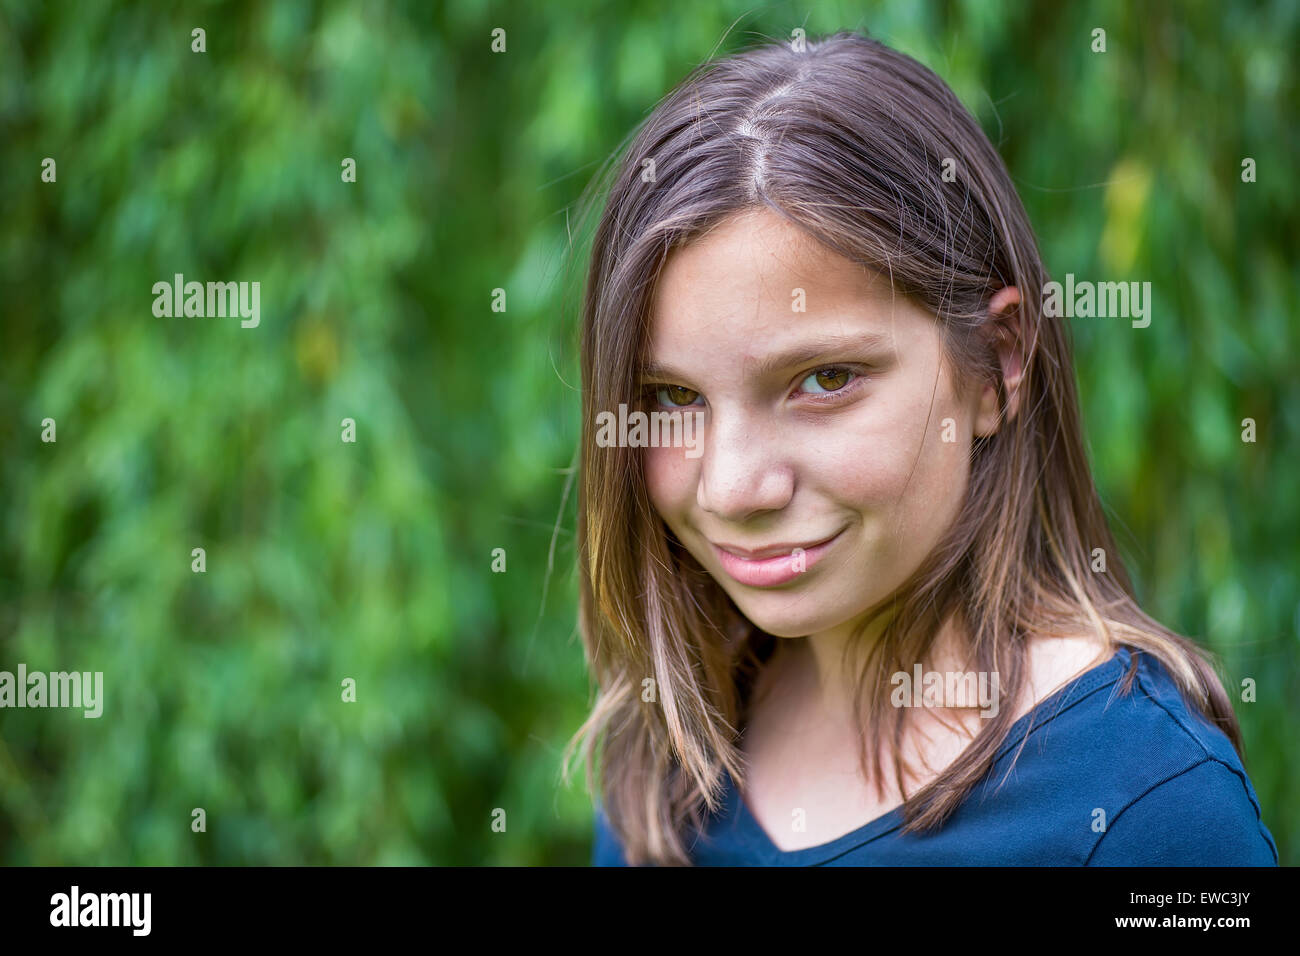 Portrait of caucasian teenage girl in front of green willow Stock Photo